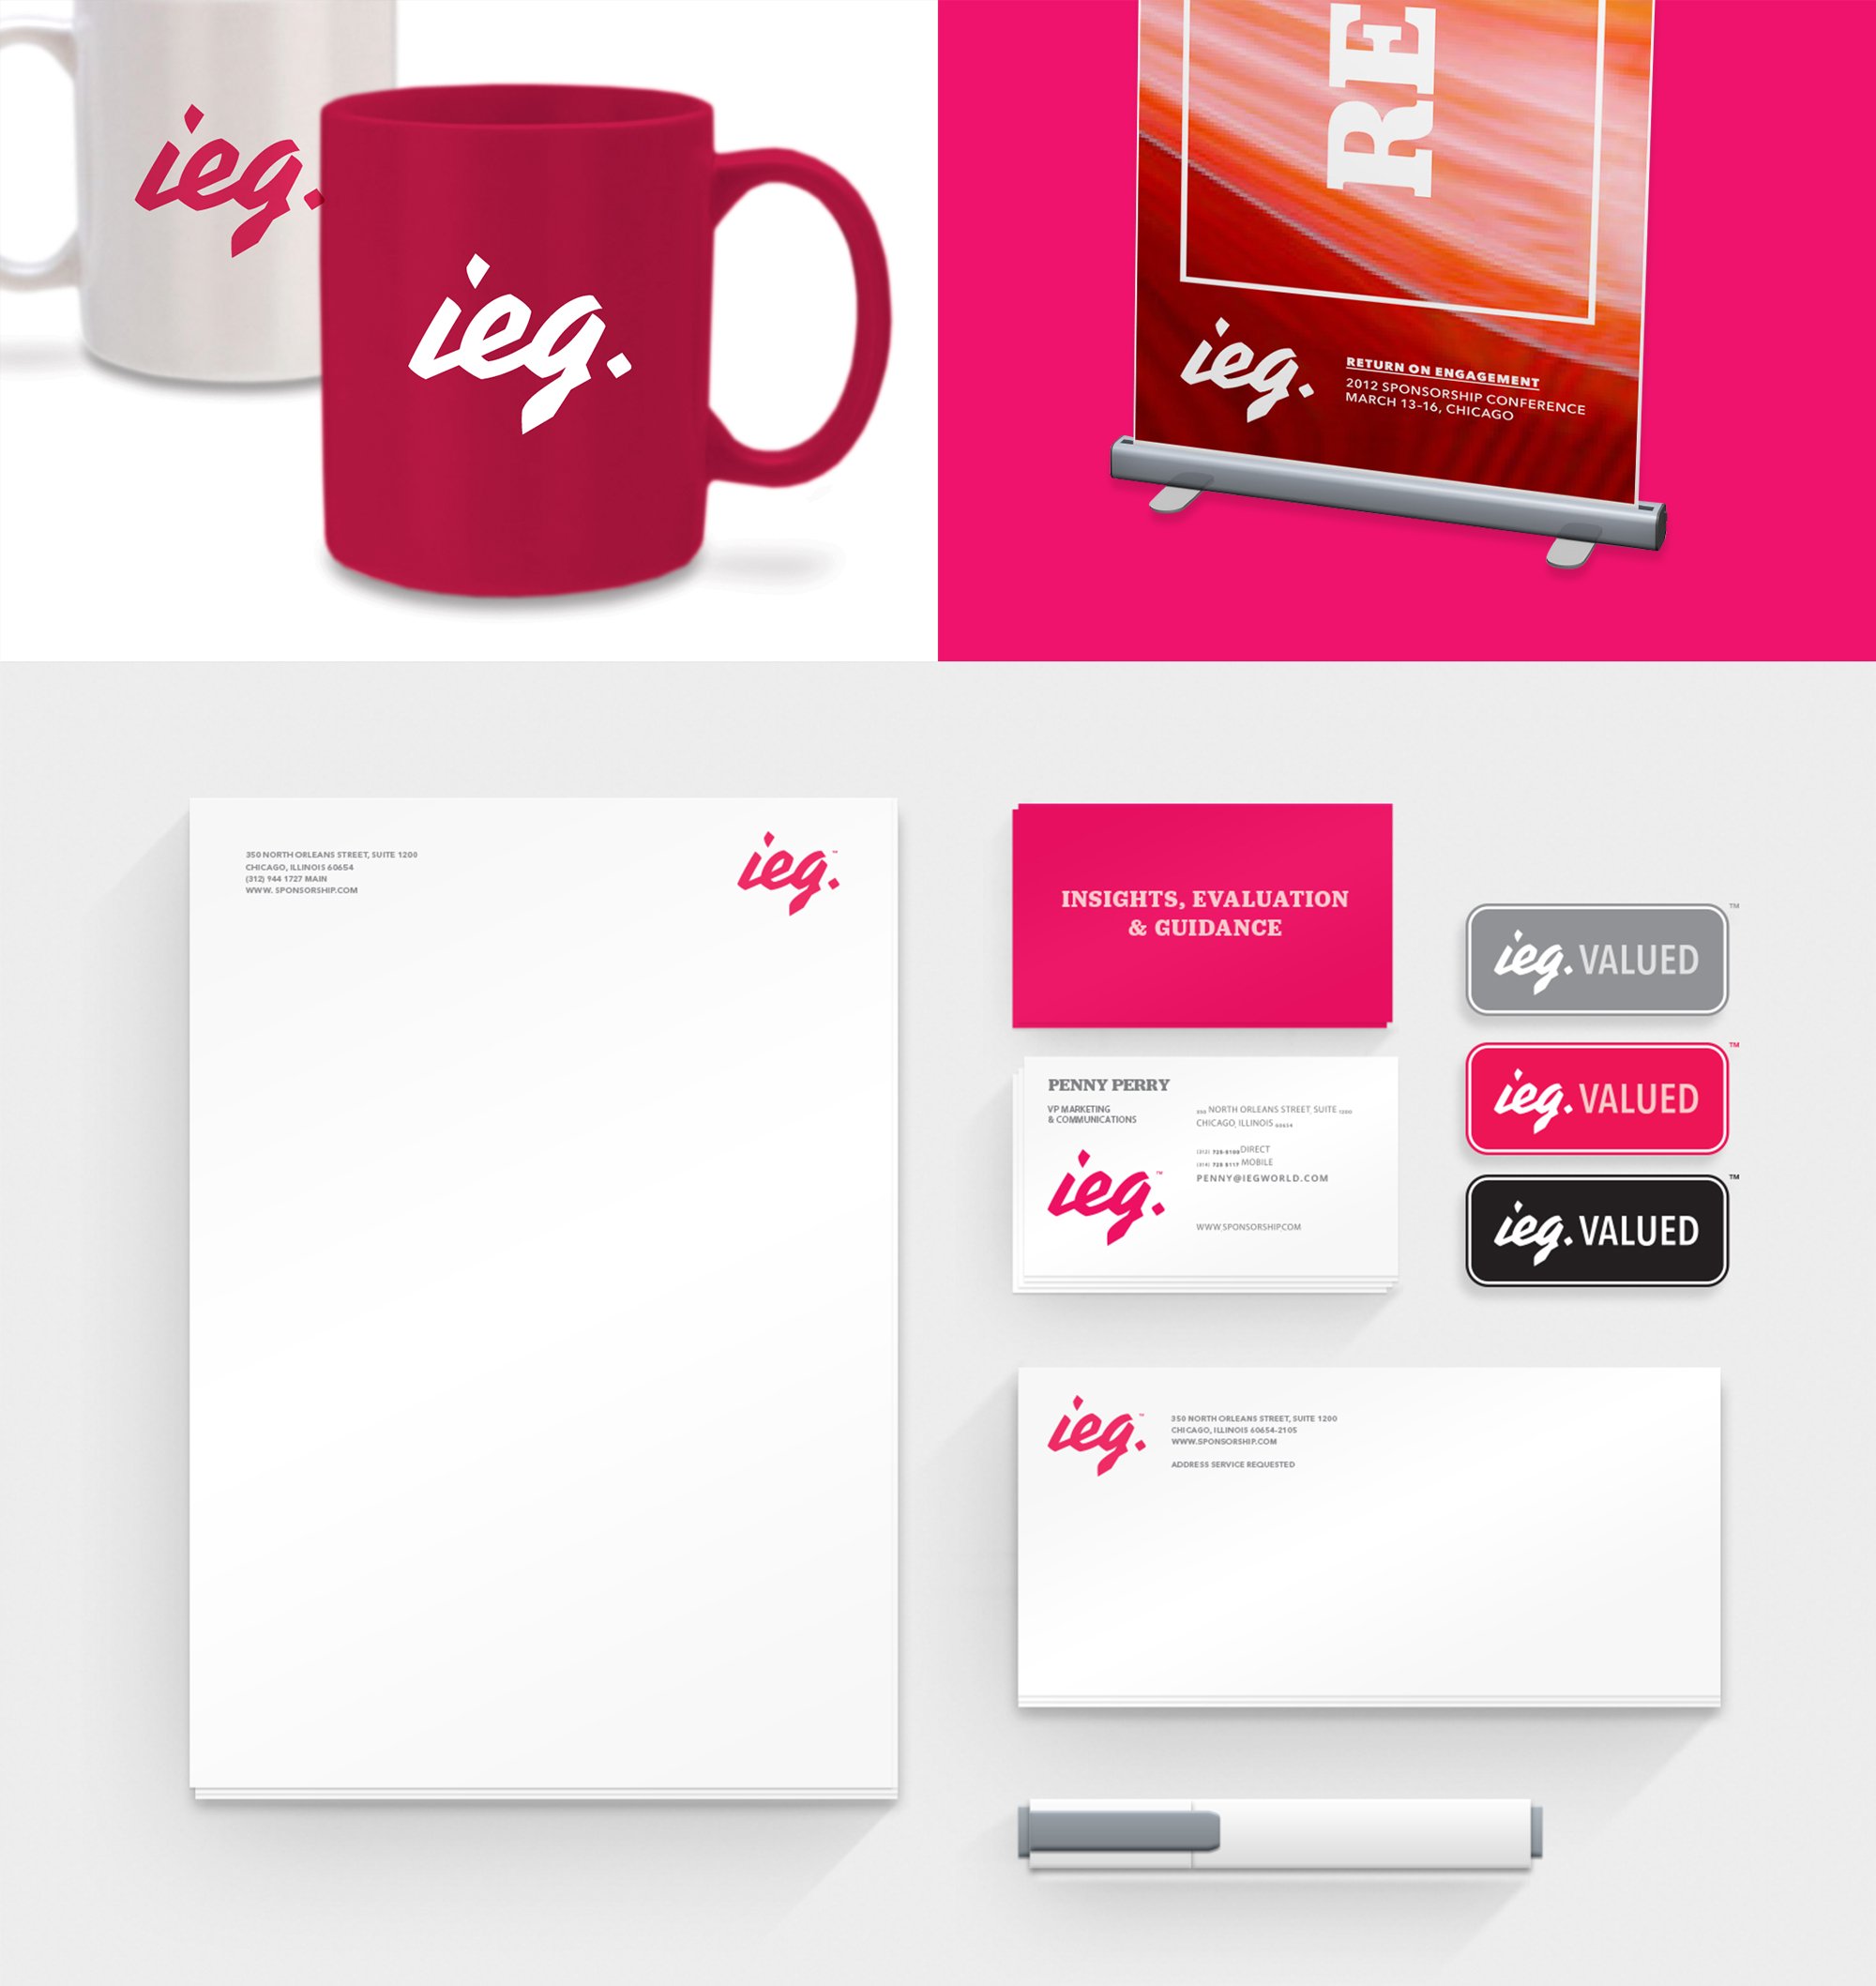 IEG stationery and swag